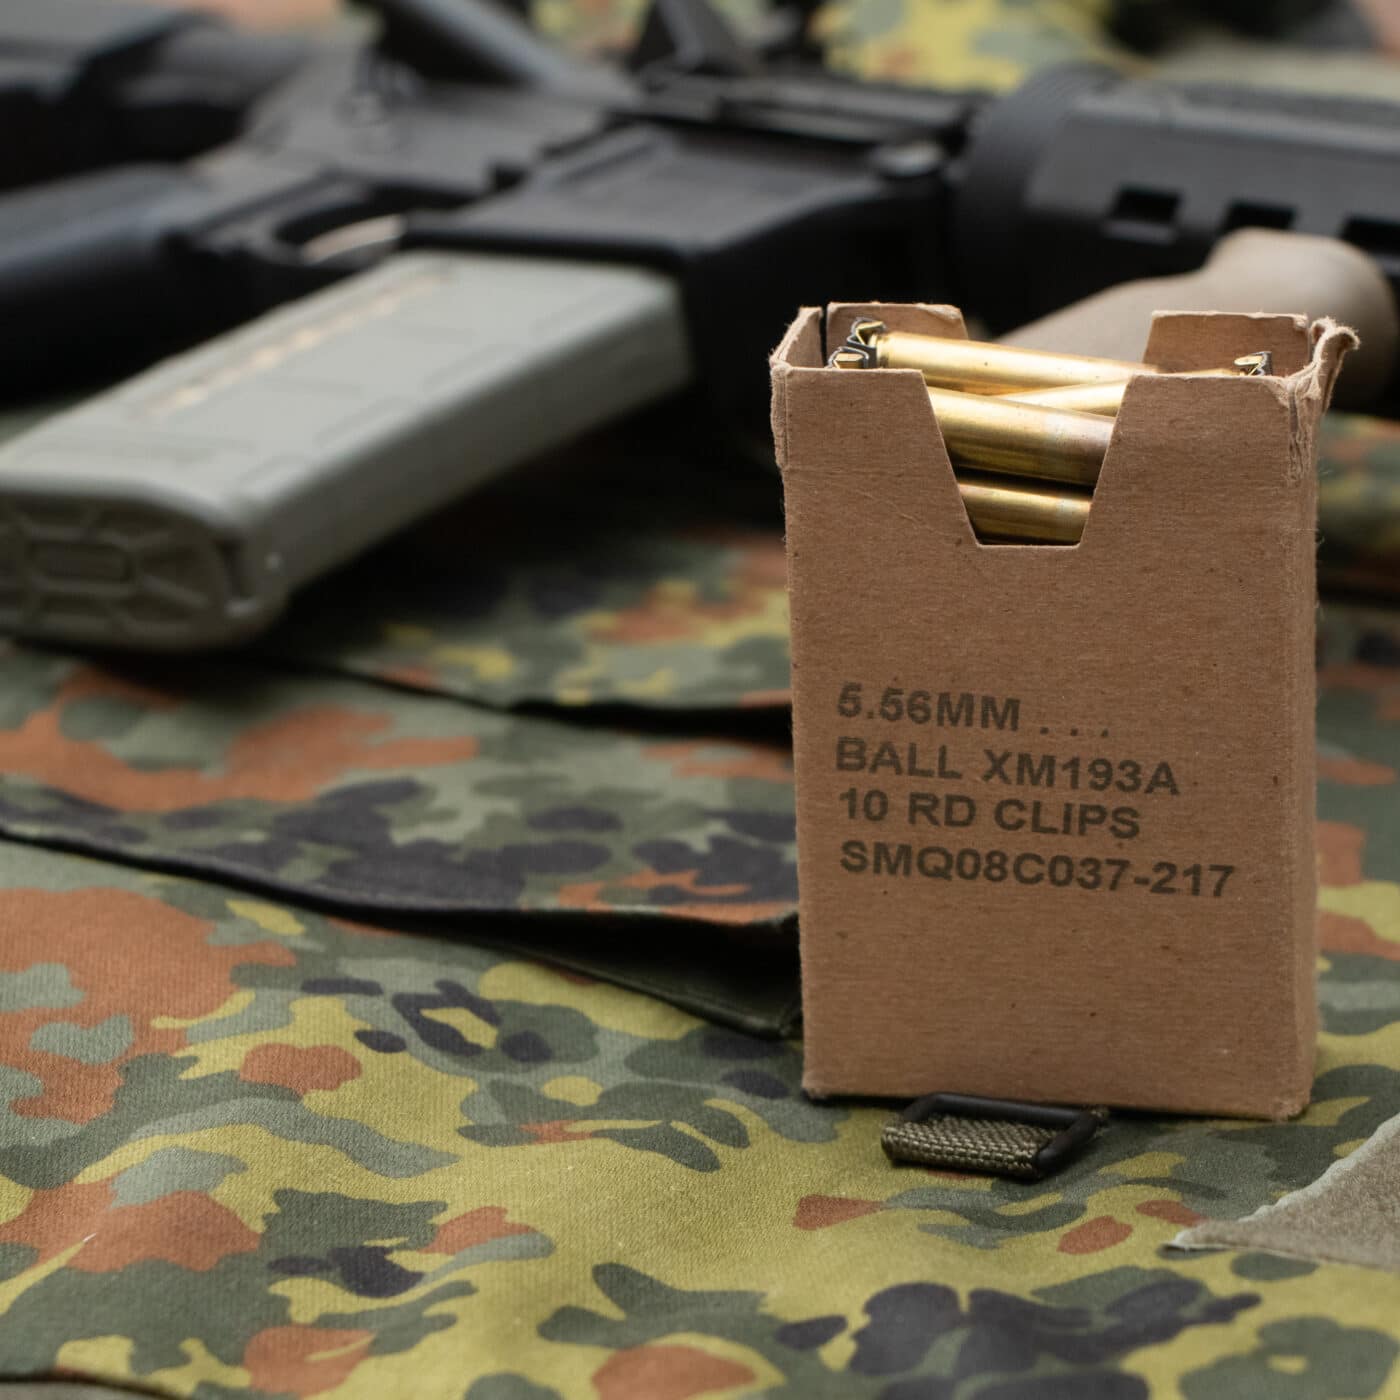 Common rifle cartridges that can penetrate body armor